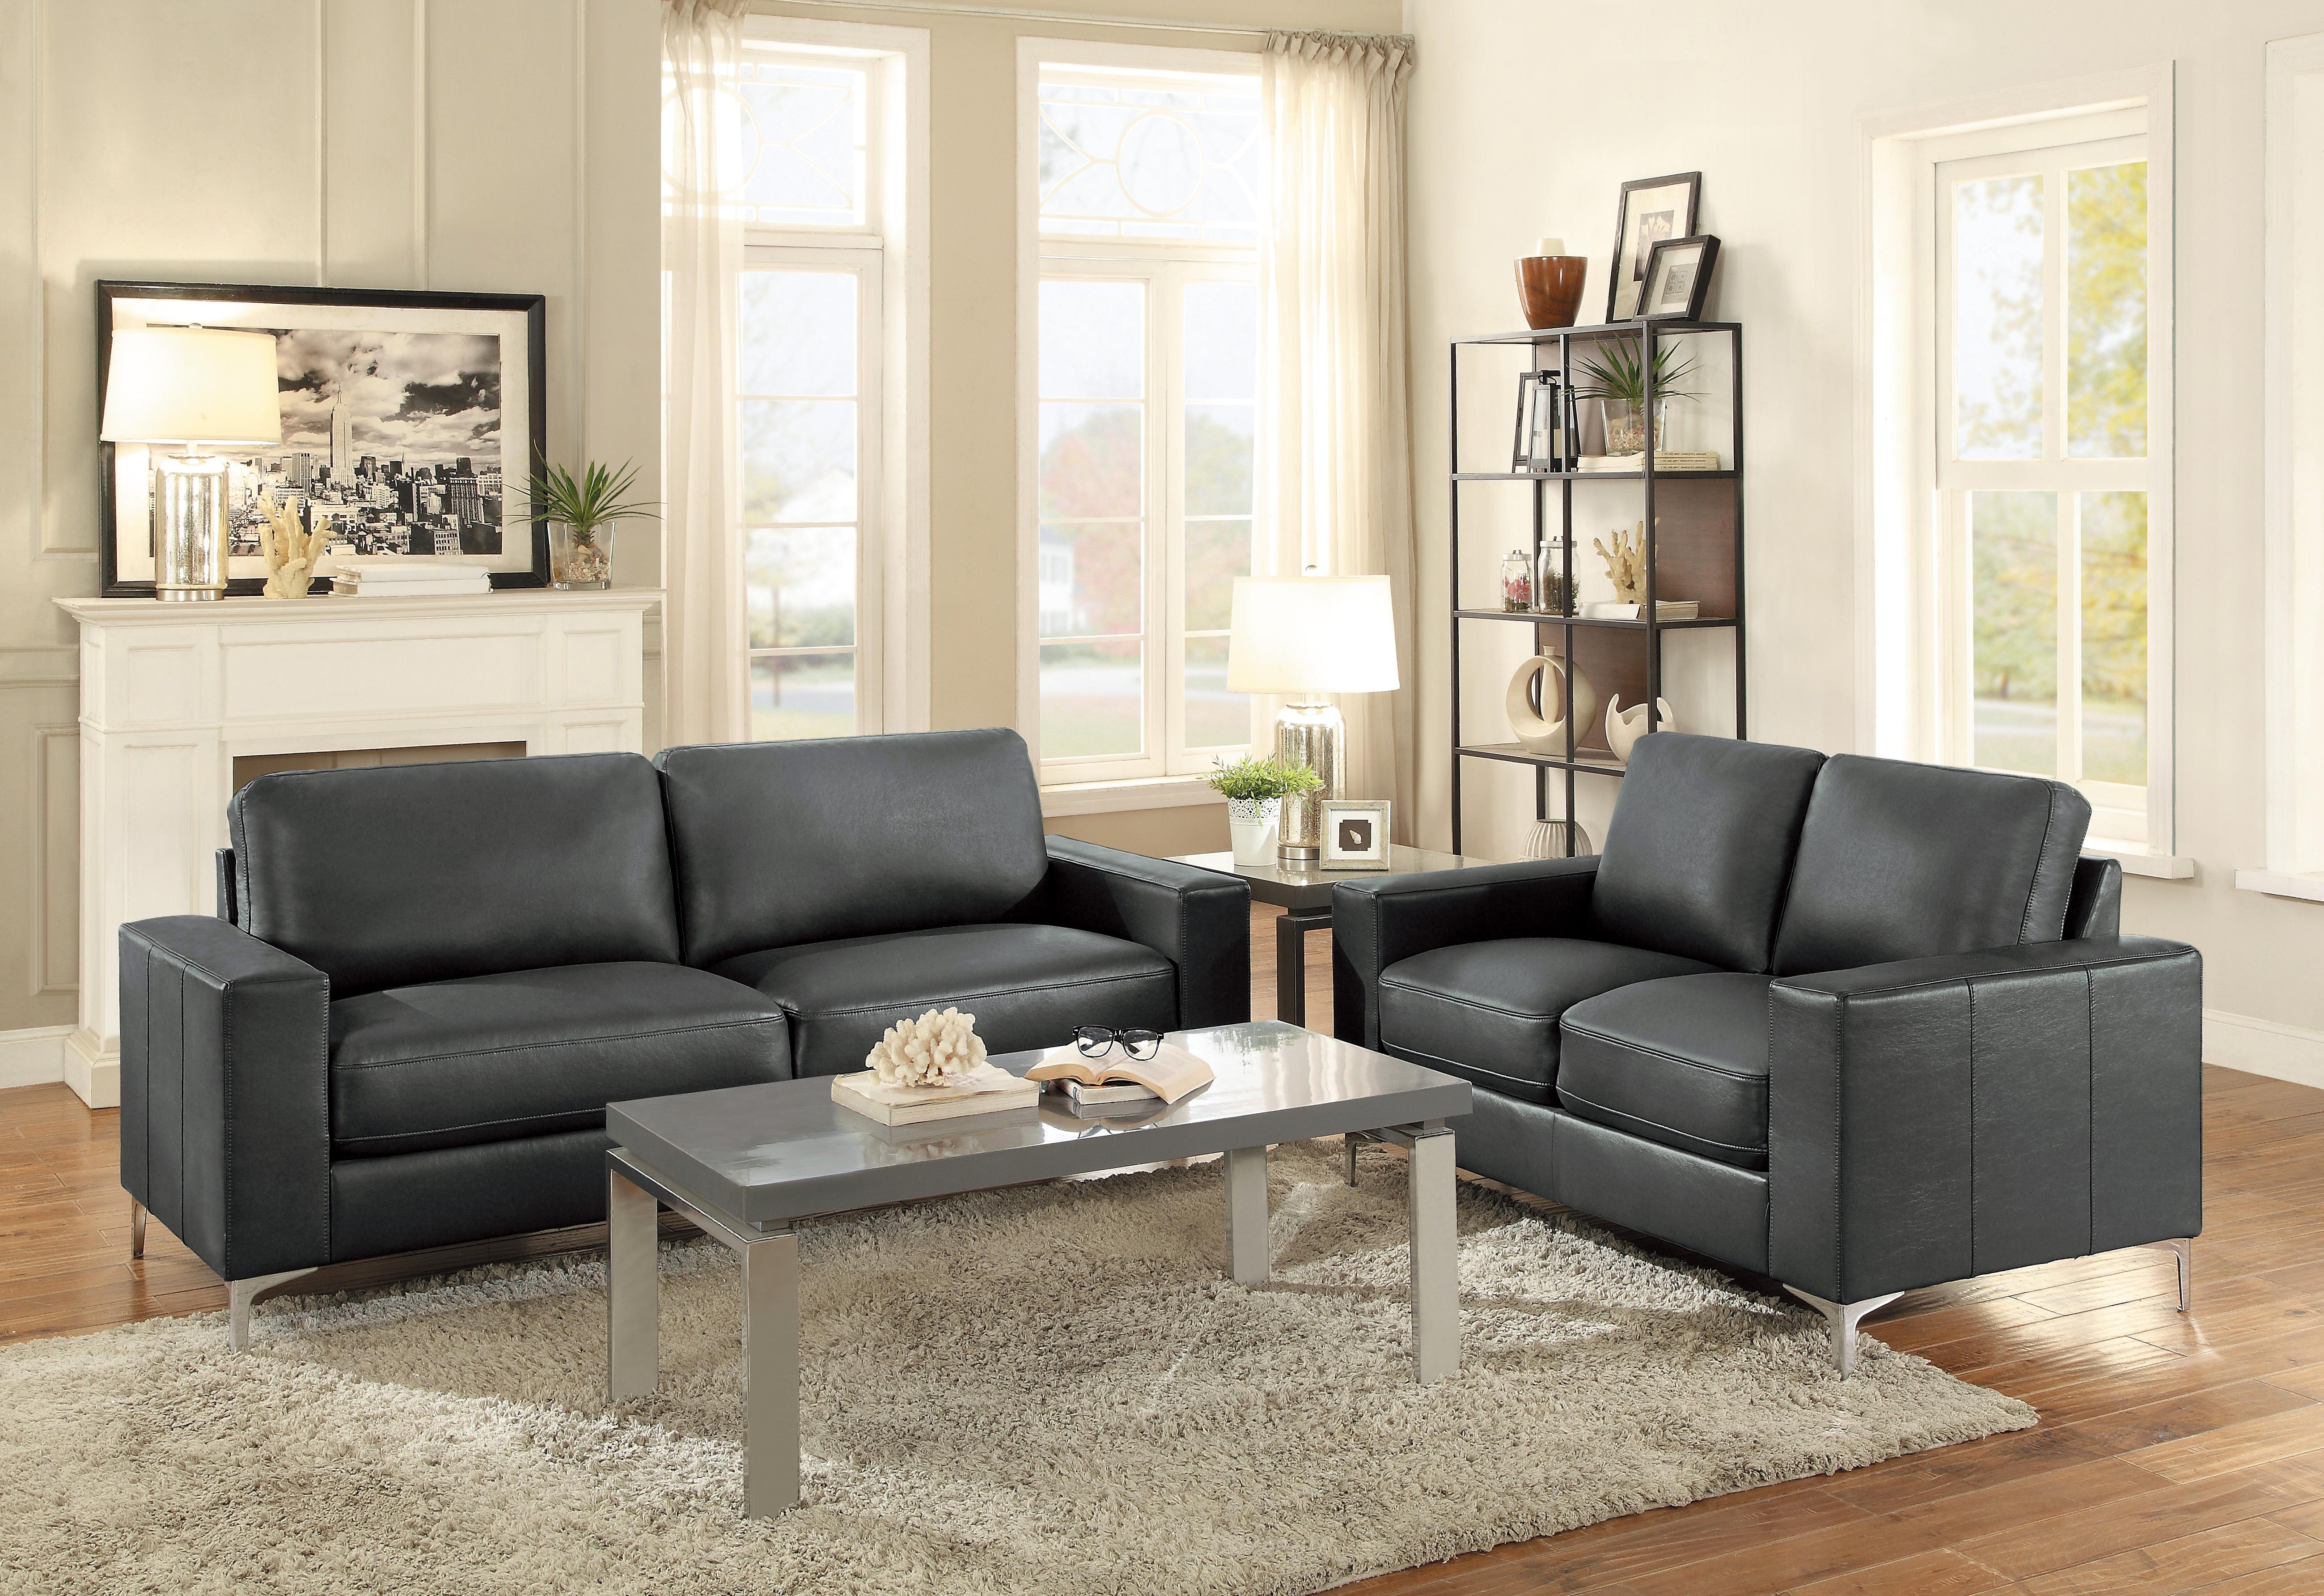 Contemporary Living Room Set 8203GY-2PC Iniko 8203GY-2PC in Gray Faux Leather